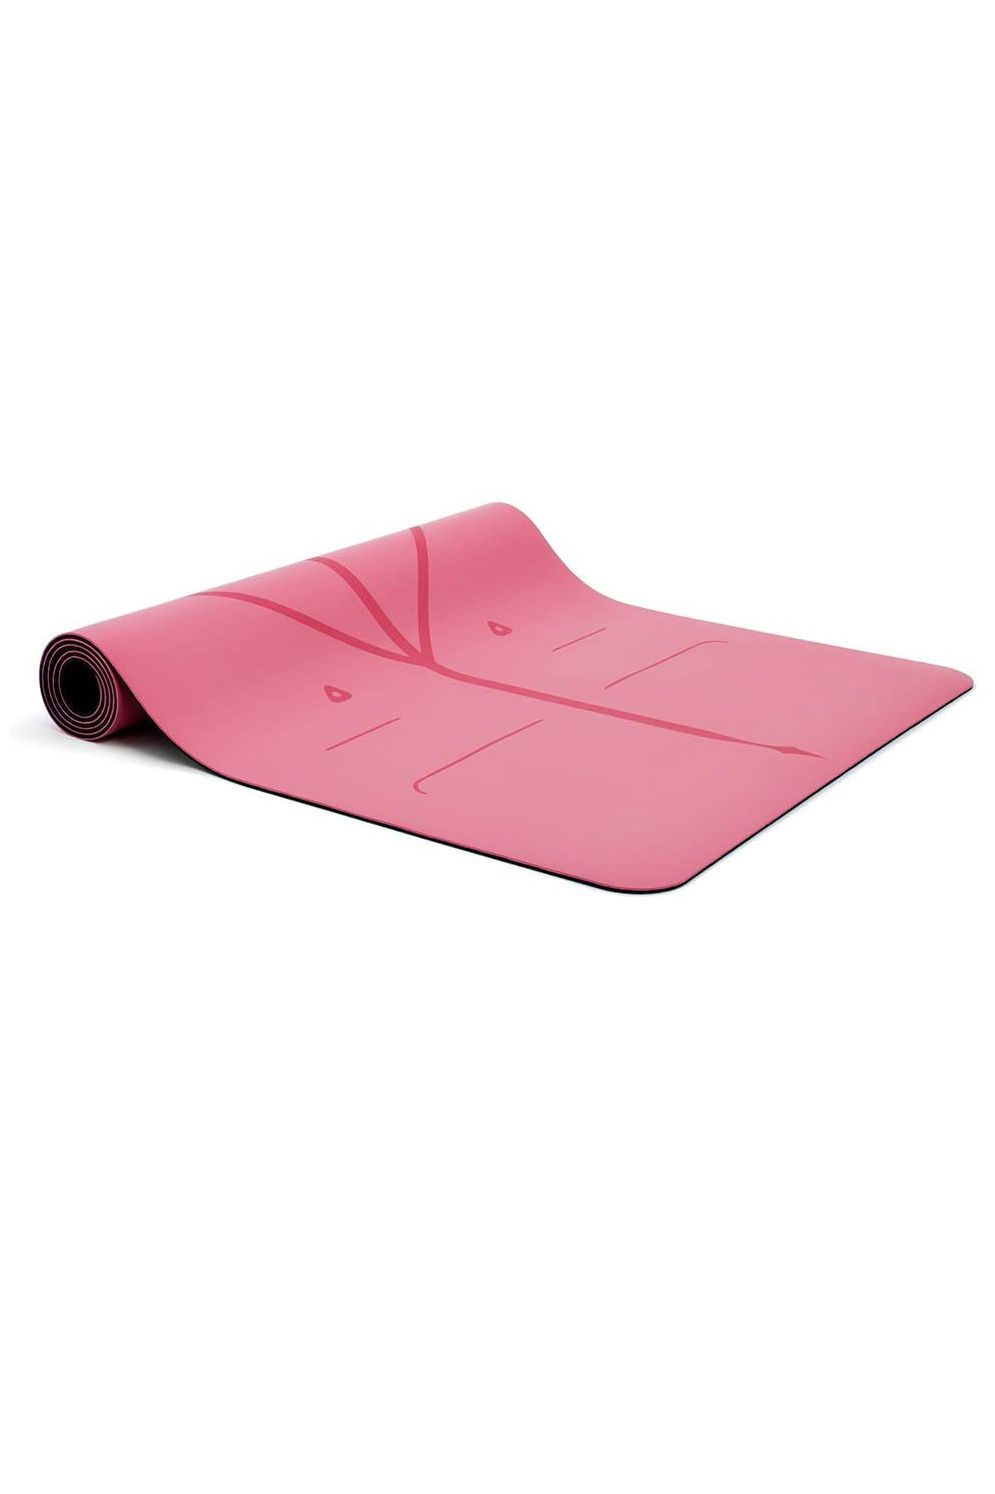 how to buy the best yoga mat